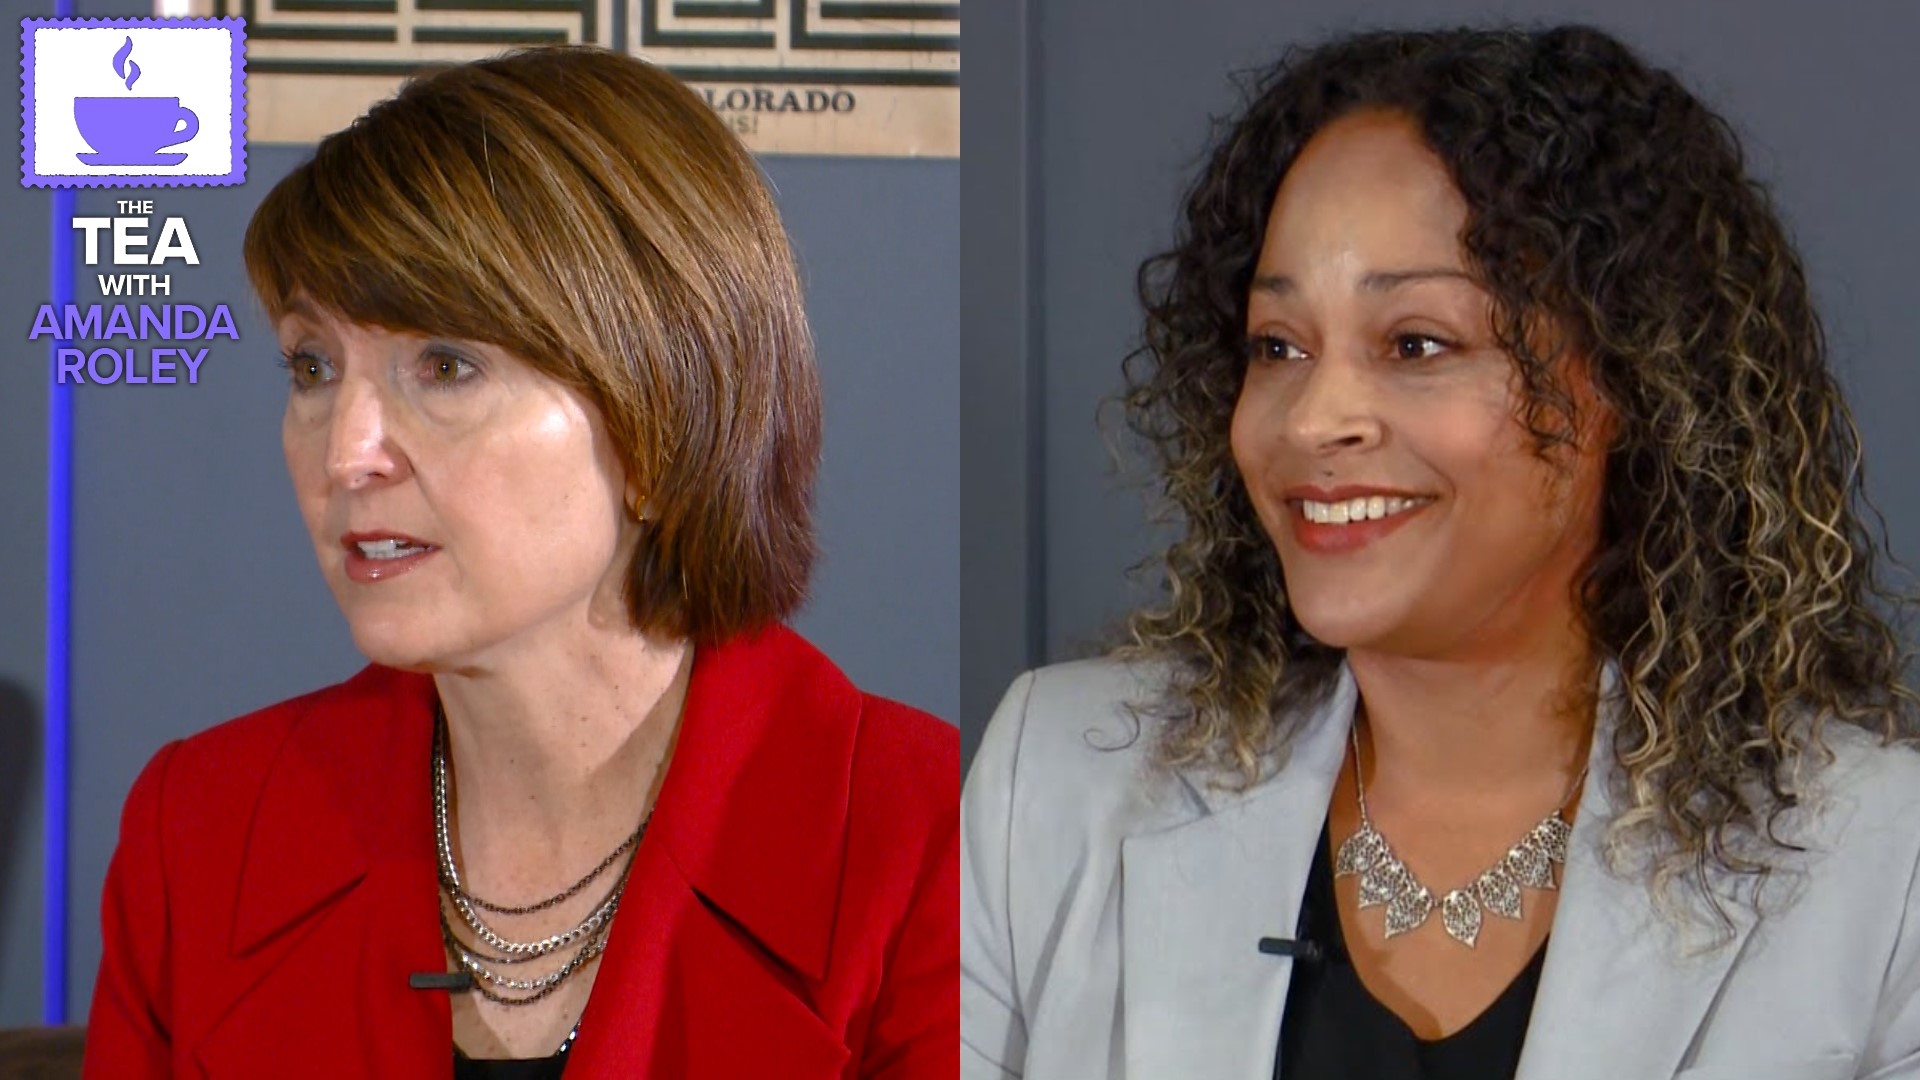 Rep. Cathy McMorris Rodgers is seeking her 10th term in Congress in Washington's 5th district. She faces Natasha Hill. Both sit down for 'The Tea with Amanda Roley.'